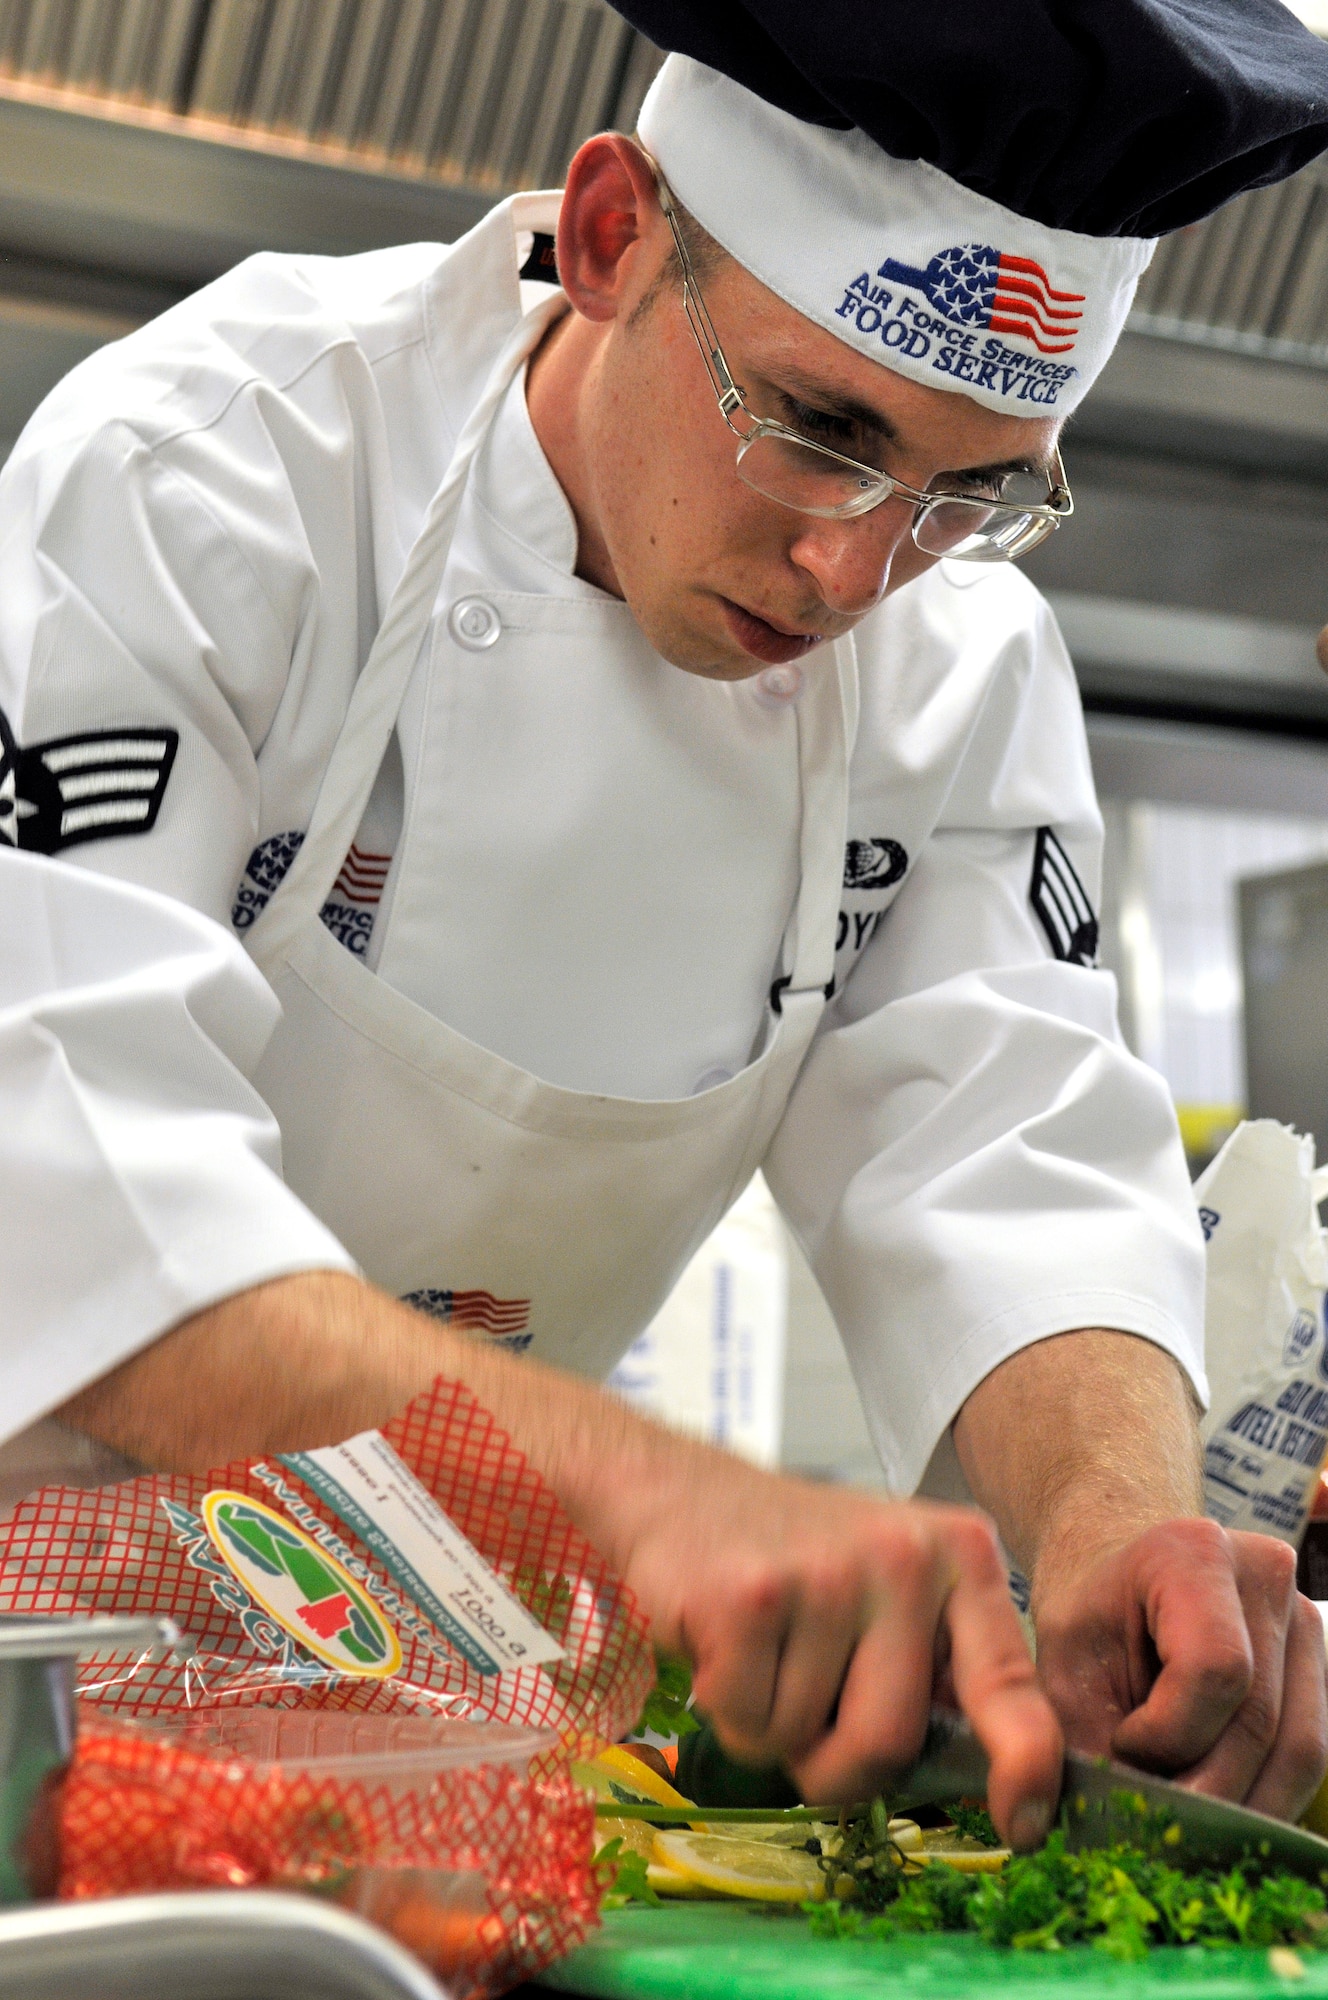 U.S. Air Force Senior Airman Gary Adamoyurka, 435th Services Squadron chef, prepares ingredients during the Top Chef Competition at the Lindberg Hof Dining Facility on Kapaun Air Station June 17, 2009. (U.S. Air Force photo by Staff Sgt. Stephen J. Otero)